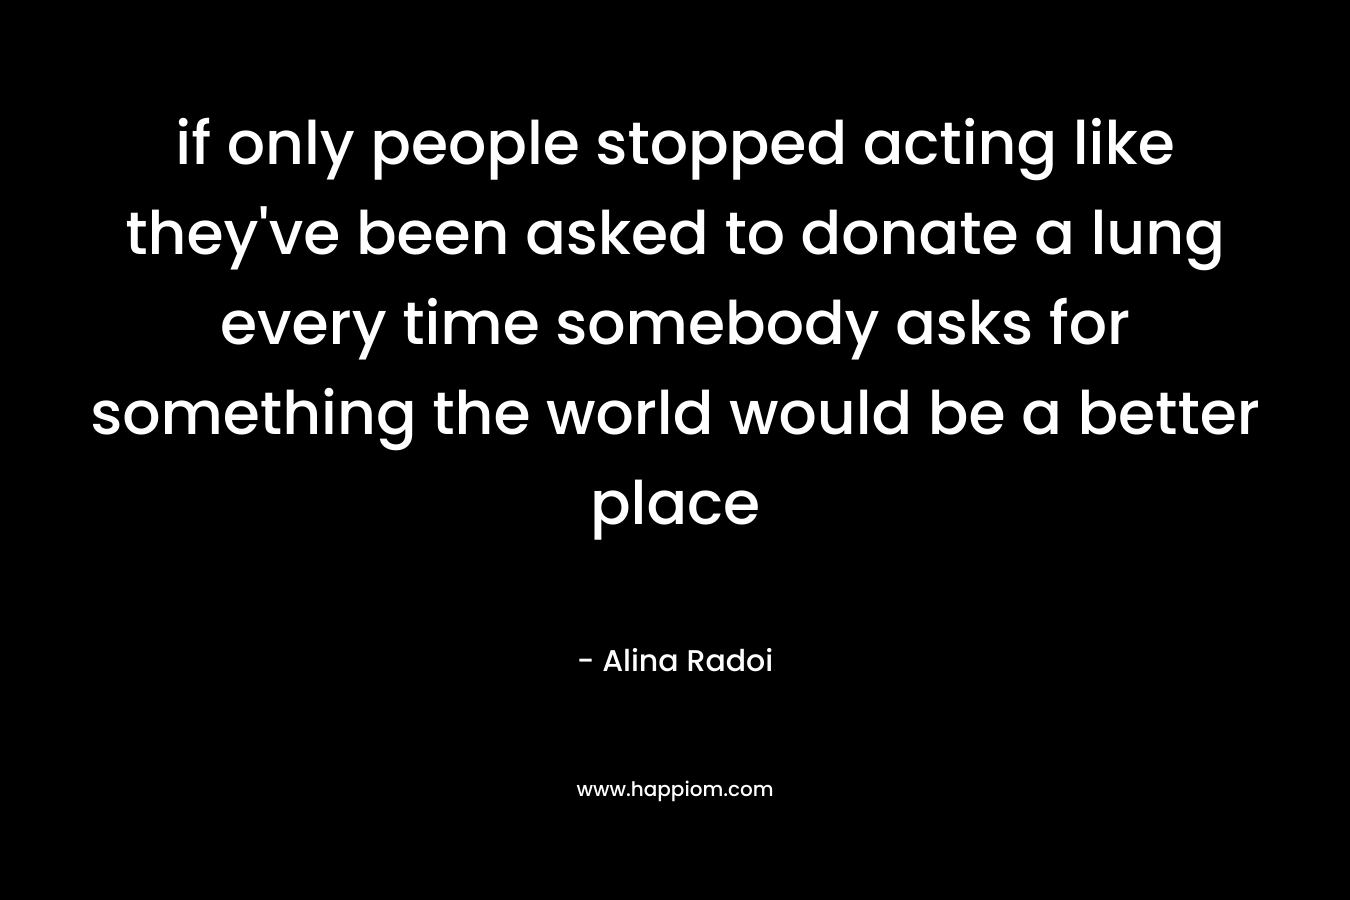 if only people stopped acting like they’ve been asked to donate a lung every time somebody asks for something the world would be a better place – Alina Radoi